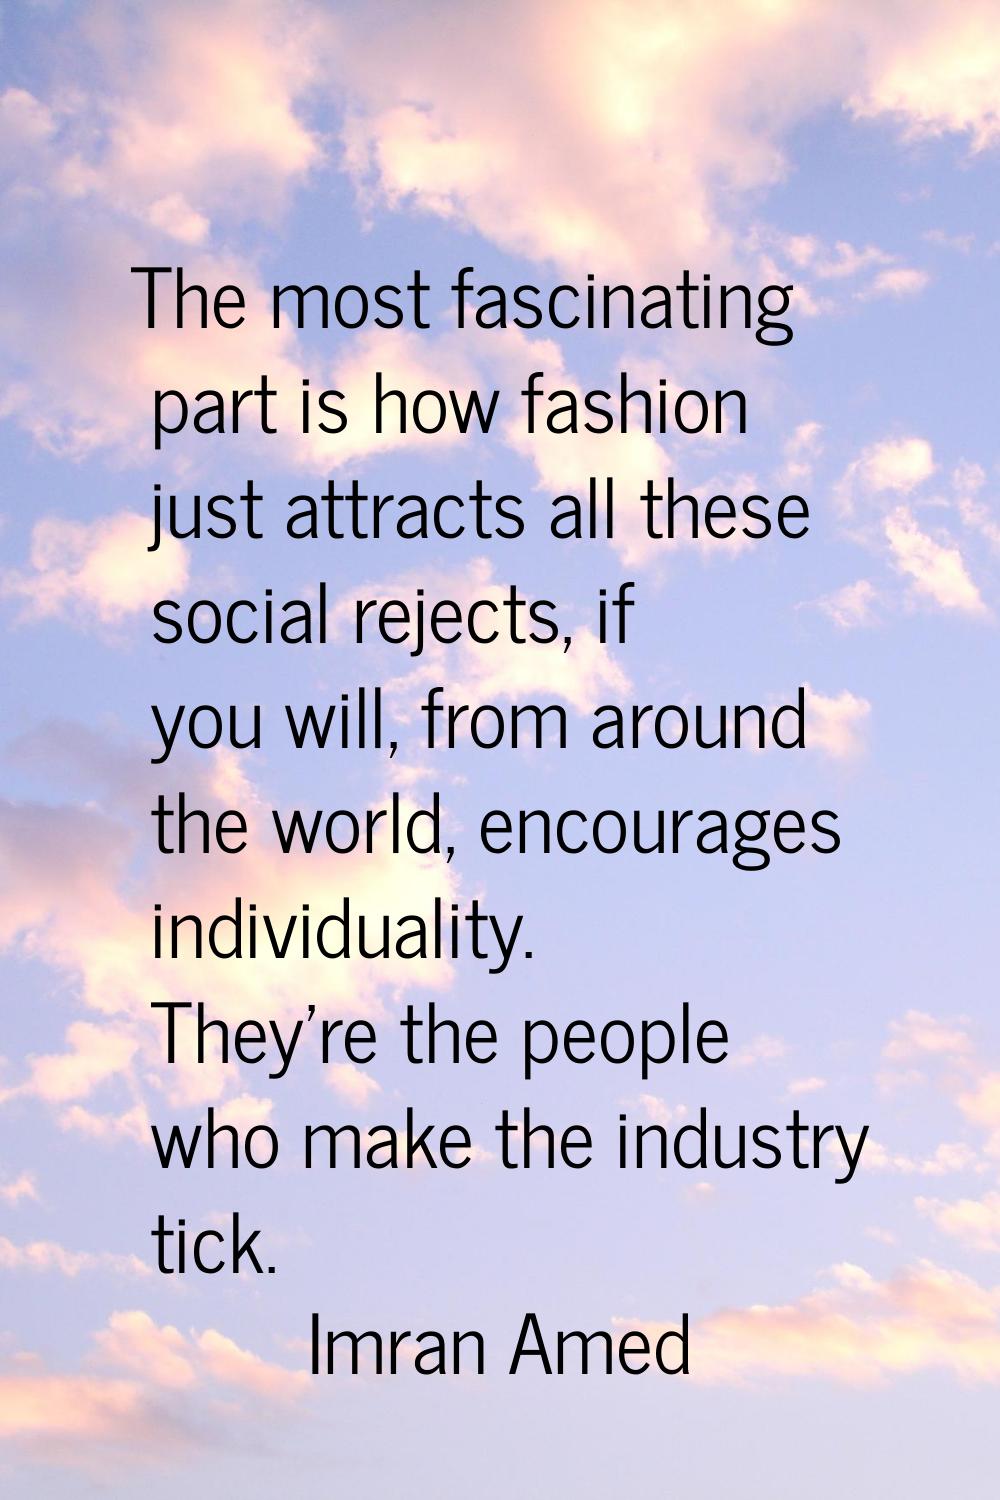 The most fascinating part is how fashion just attracts all these social rejects, if you will, from 